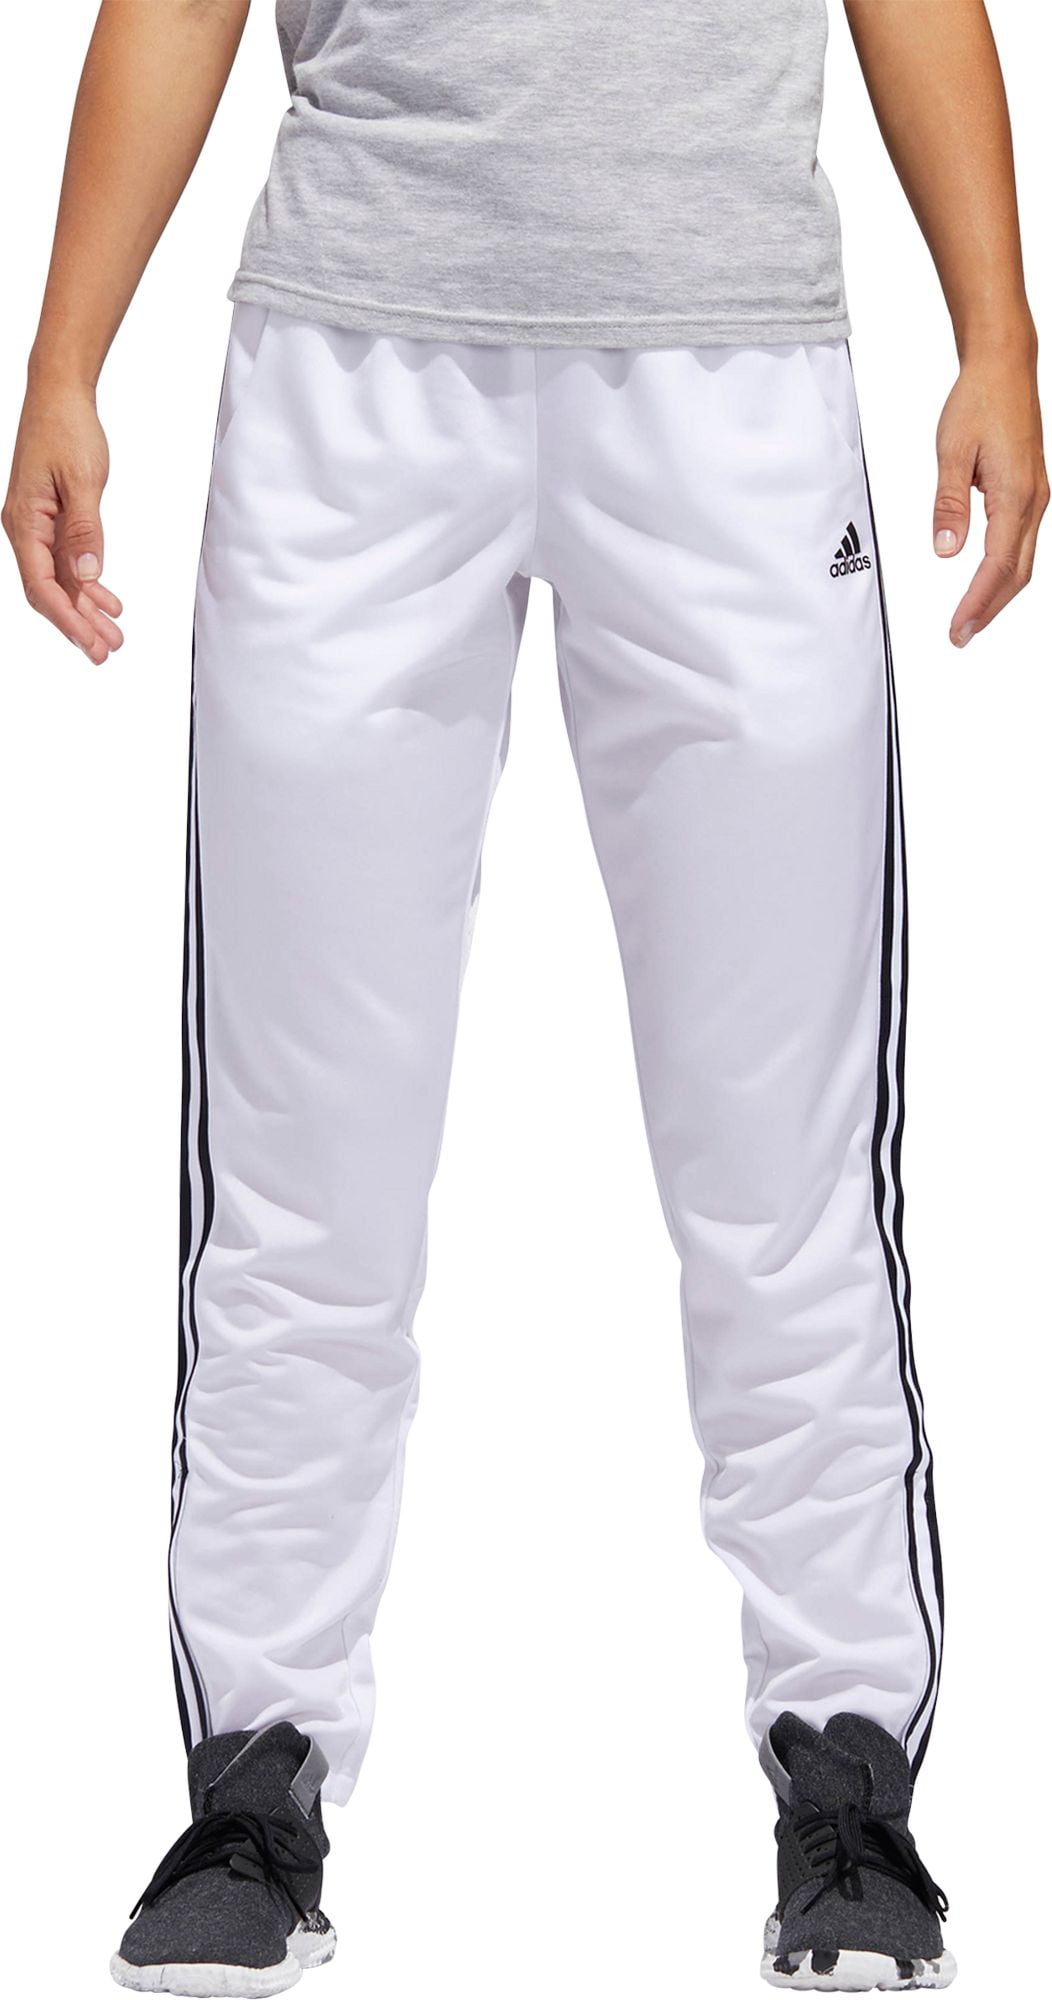 adidas tricot tapered pants